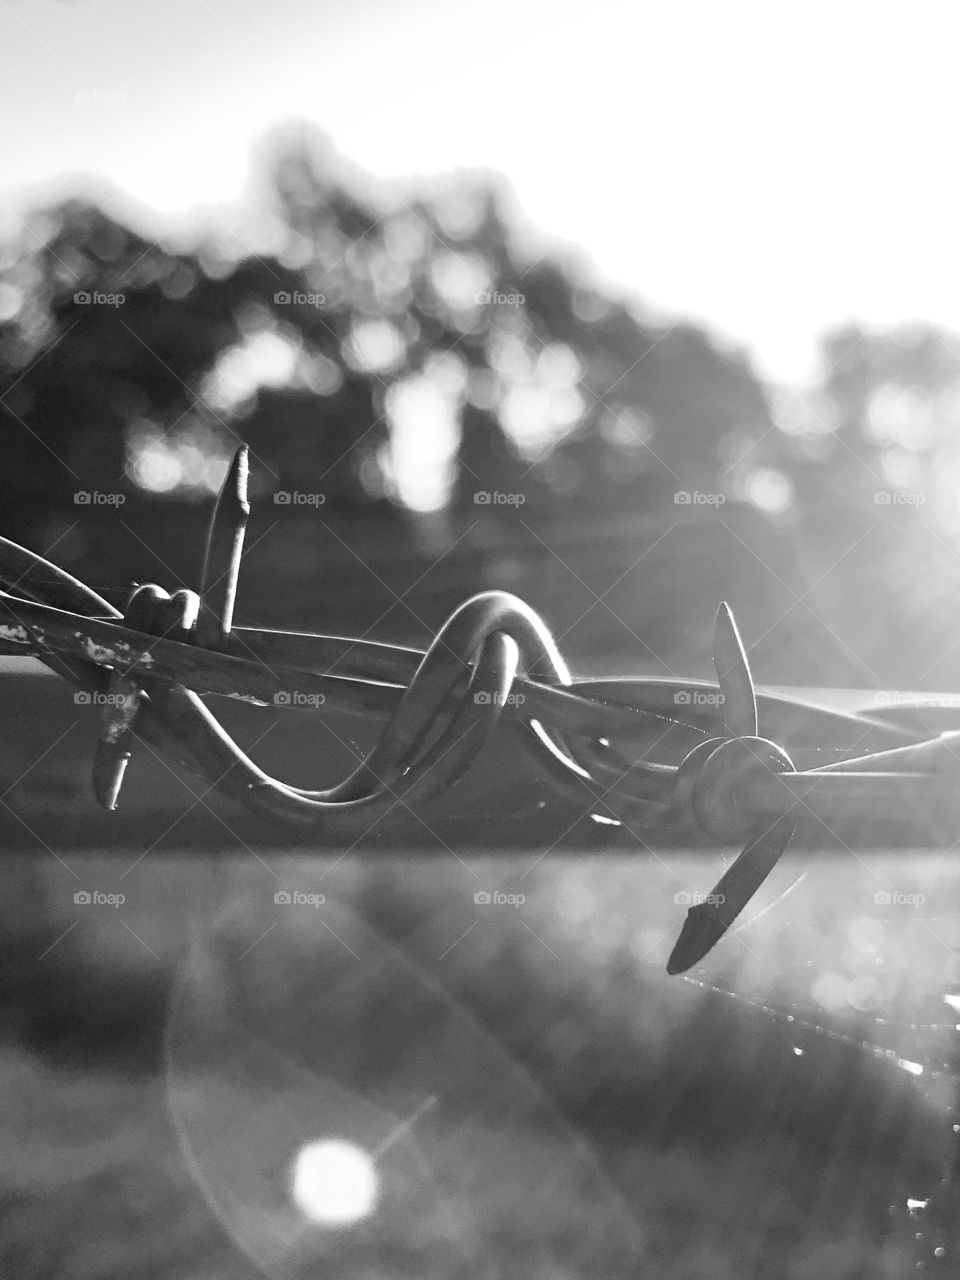 Closeup of barbed wire with sun flare against a blurred field and trees in a rural area in monochrome